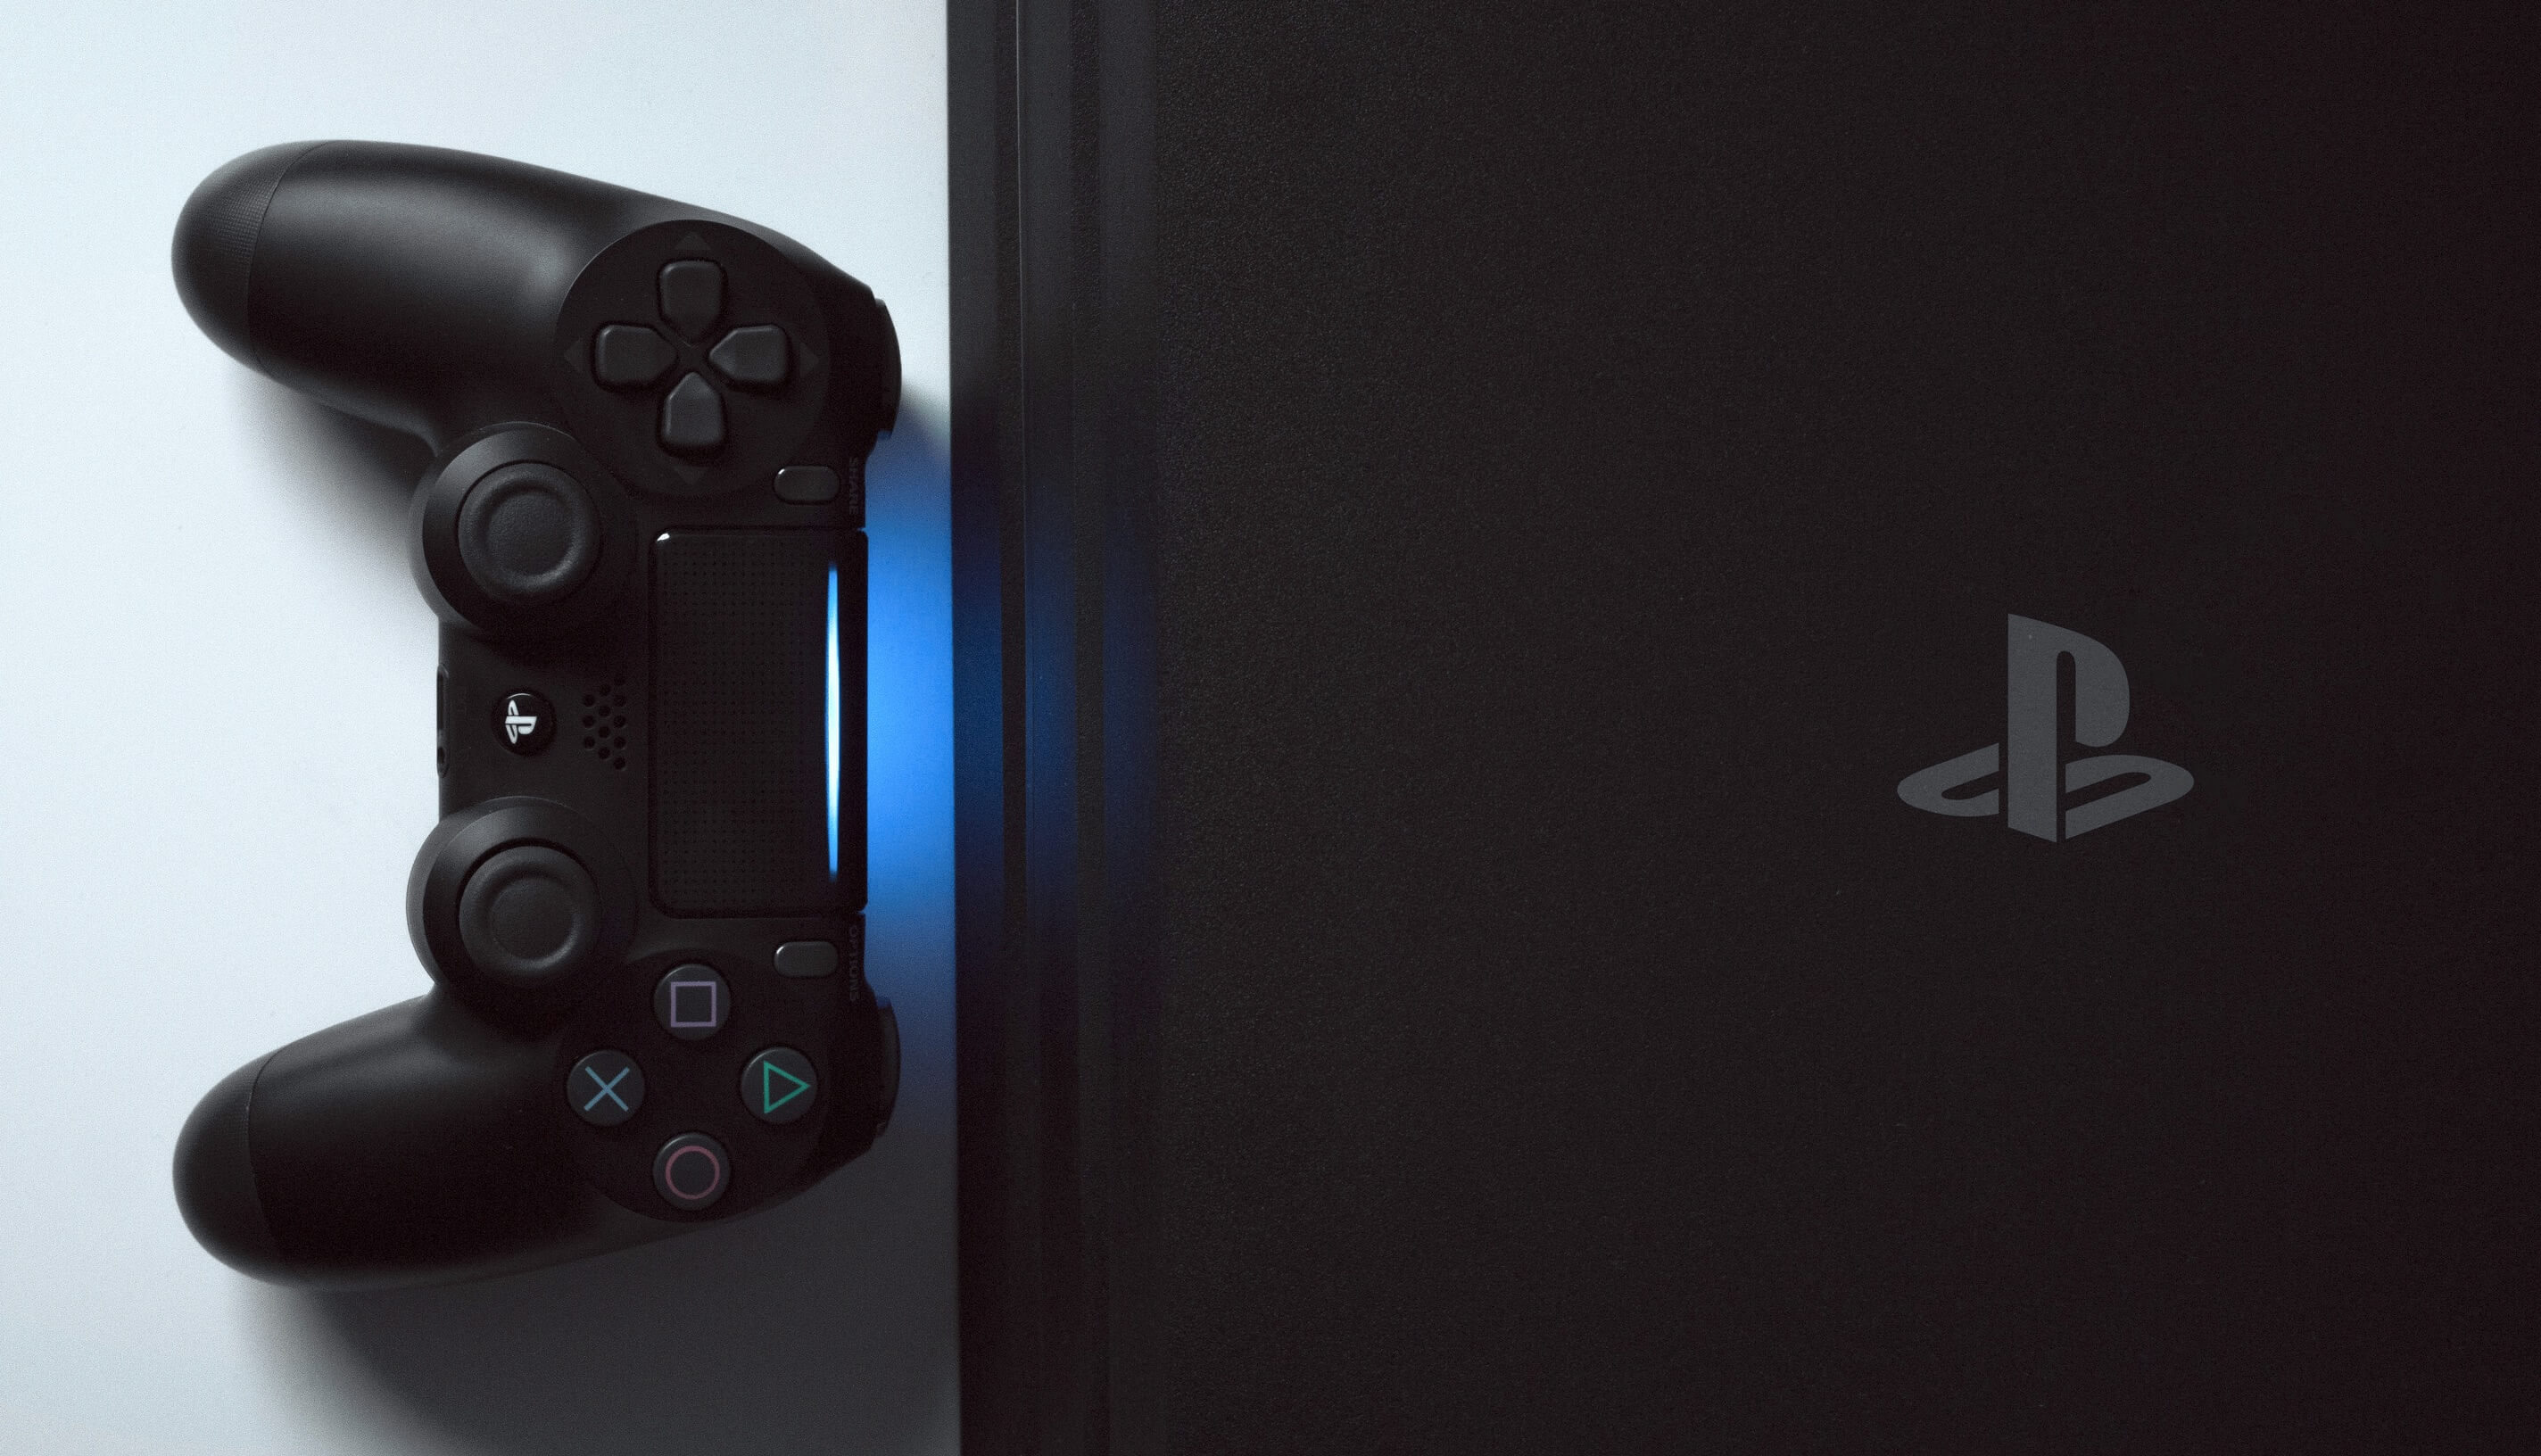 PlayStation 4 console and game sales decline as PS5 approaches